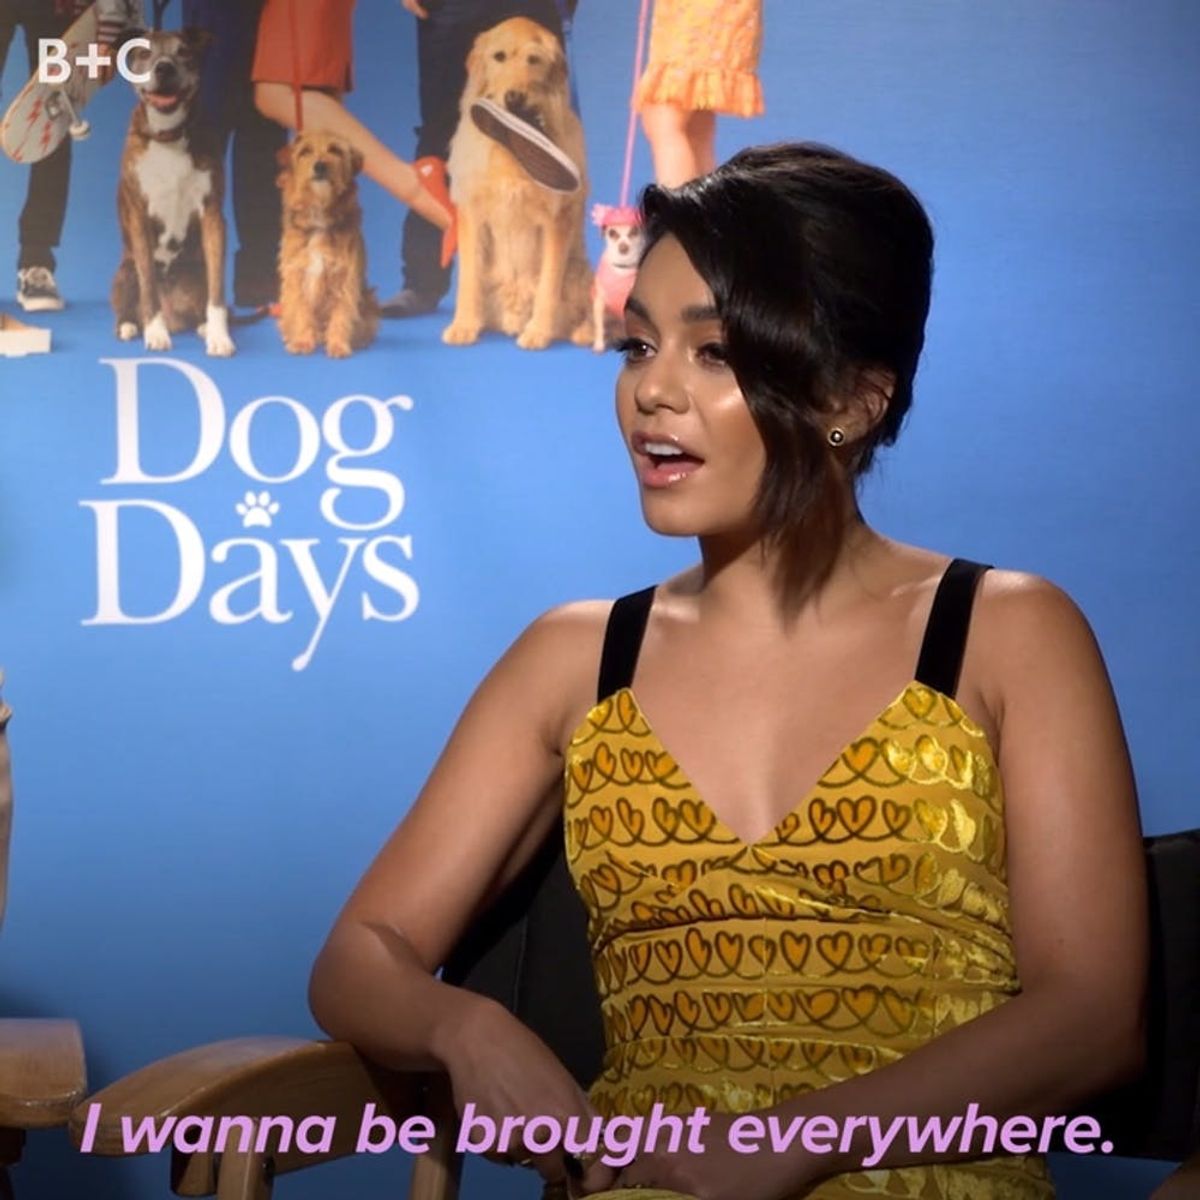 We Played “Woof” You Rather With the Cast of Dog Days